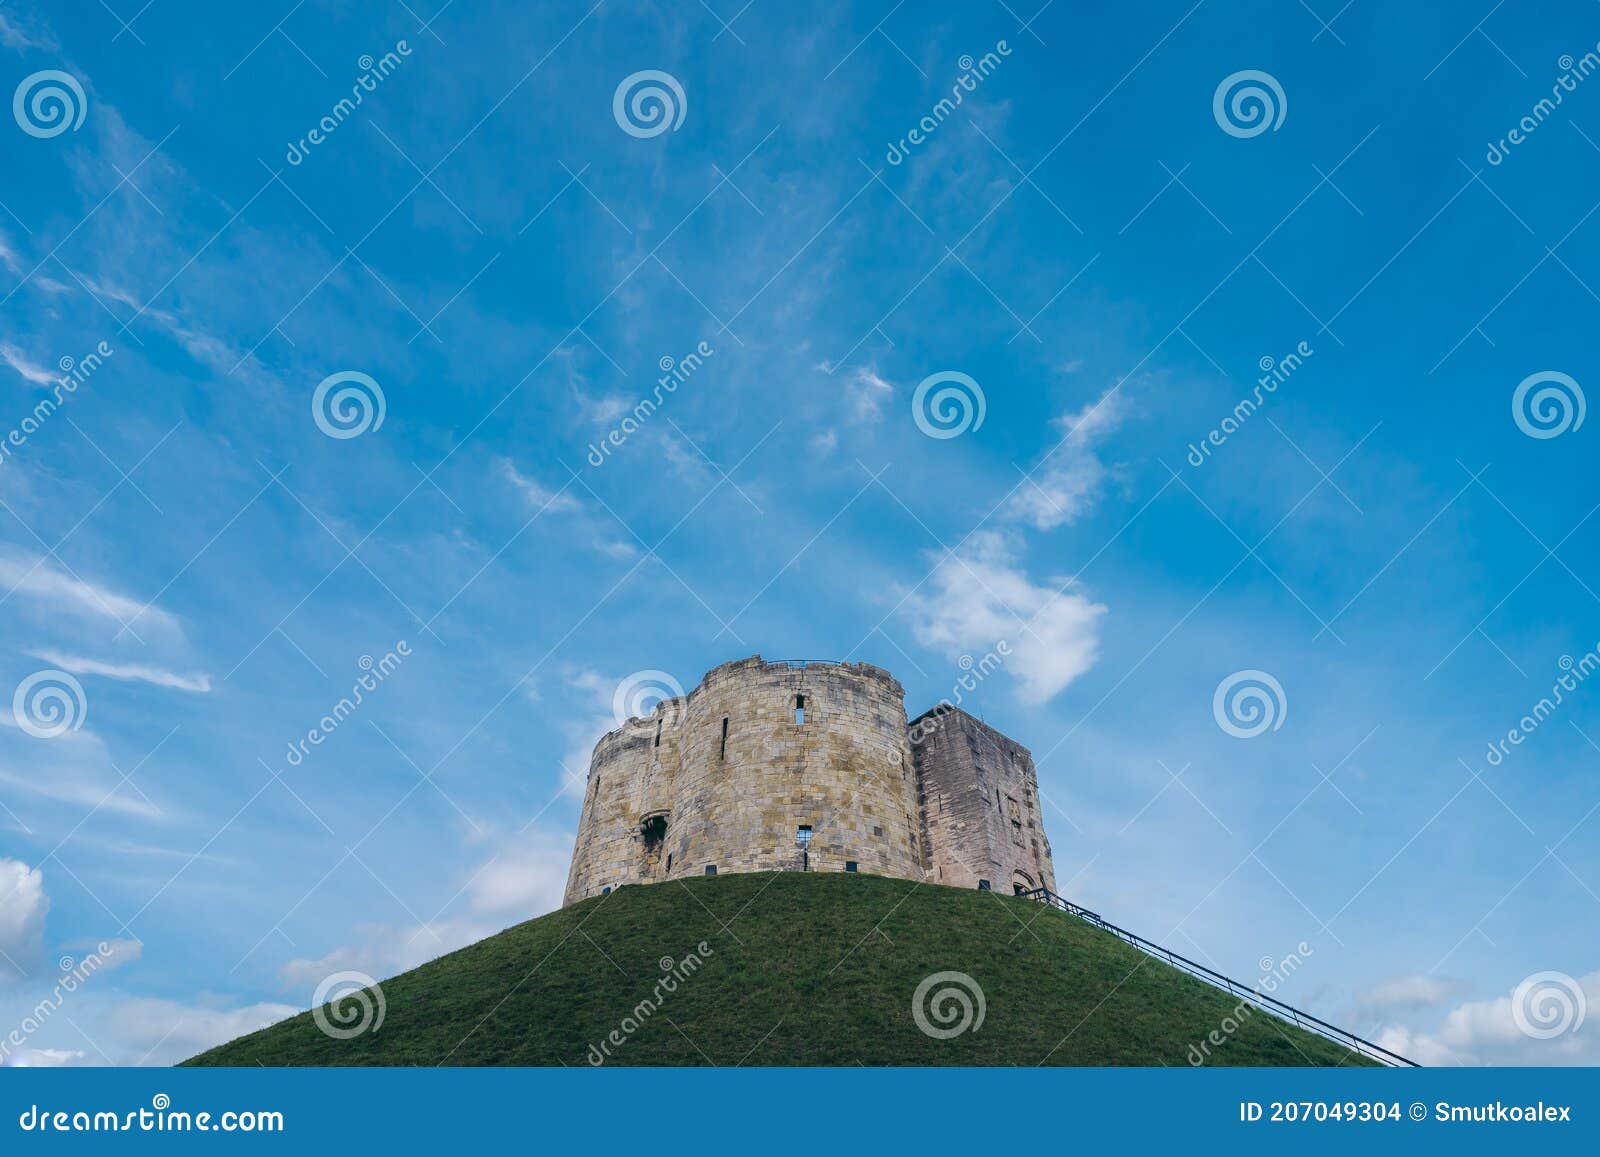 clifford\'s tower, the 13th-century castle keep, built on a grass mound, formerly used as a prison and royal mint